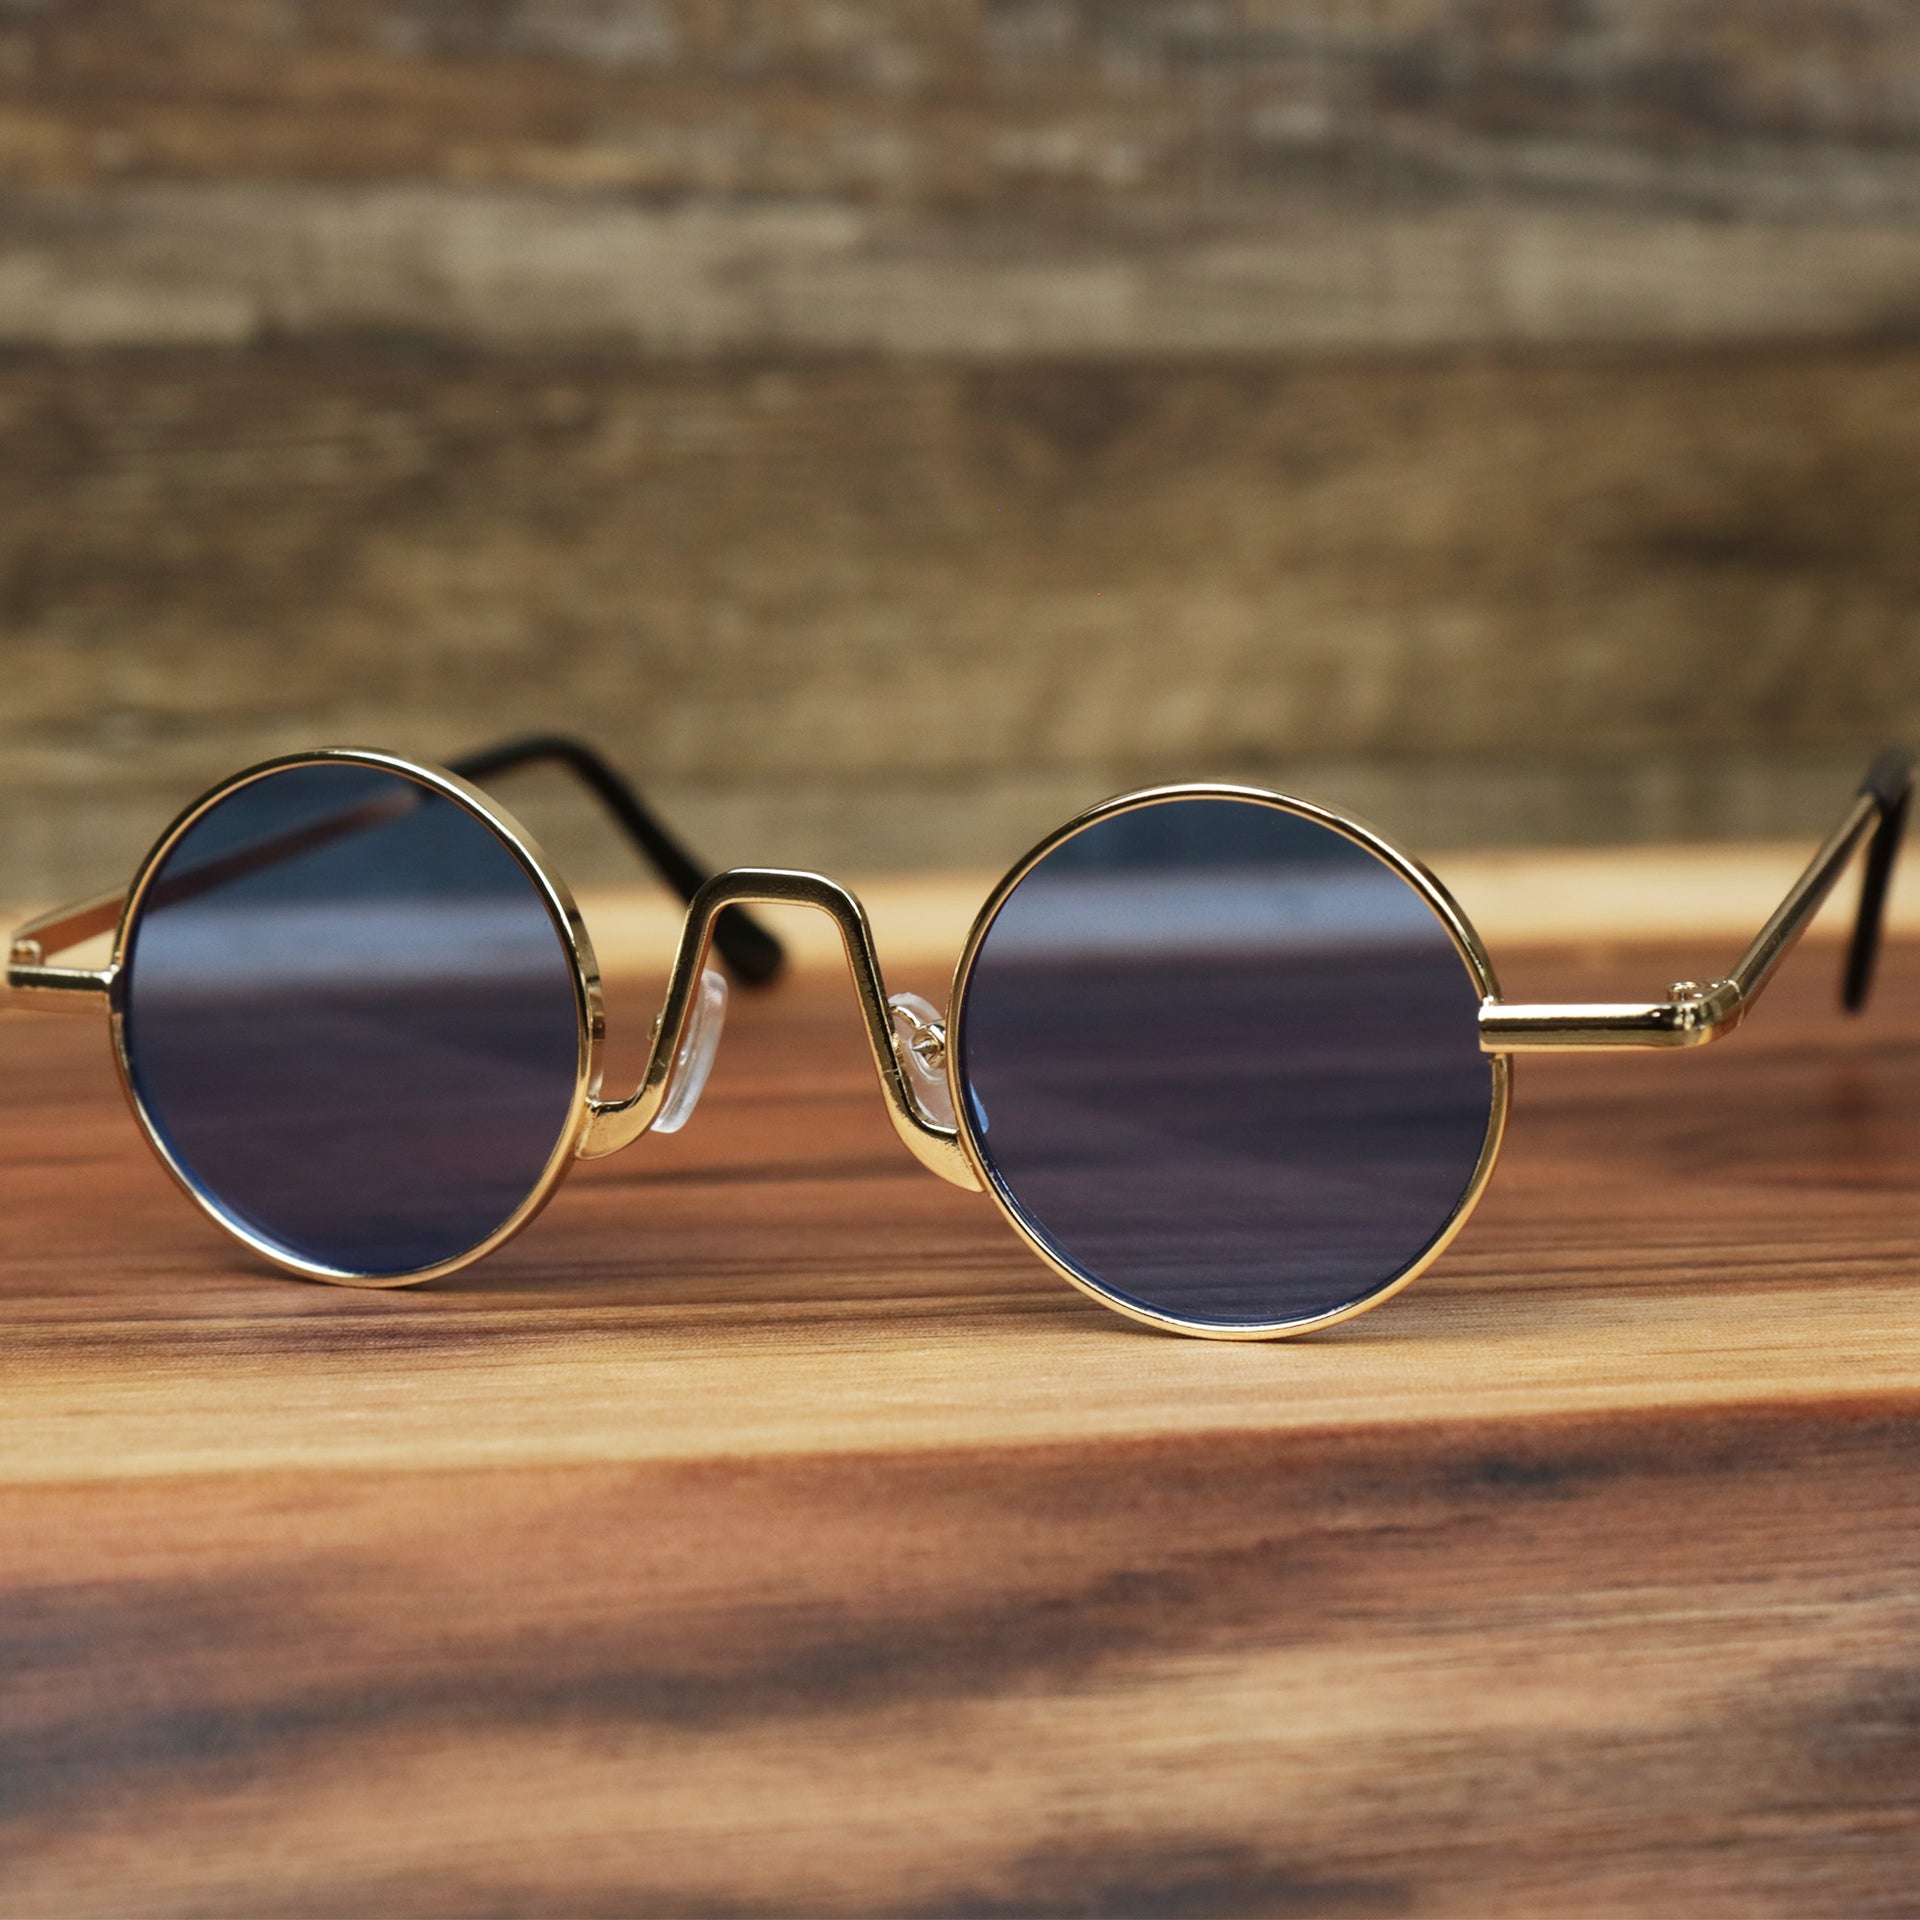 The Round Frames Blue Lens Sunglasses with Gold Frame